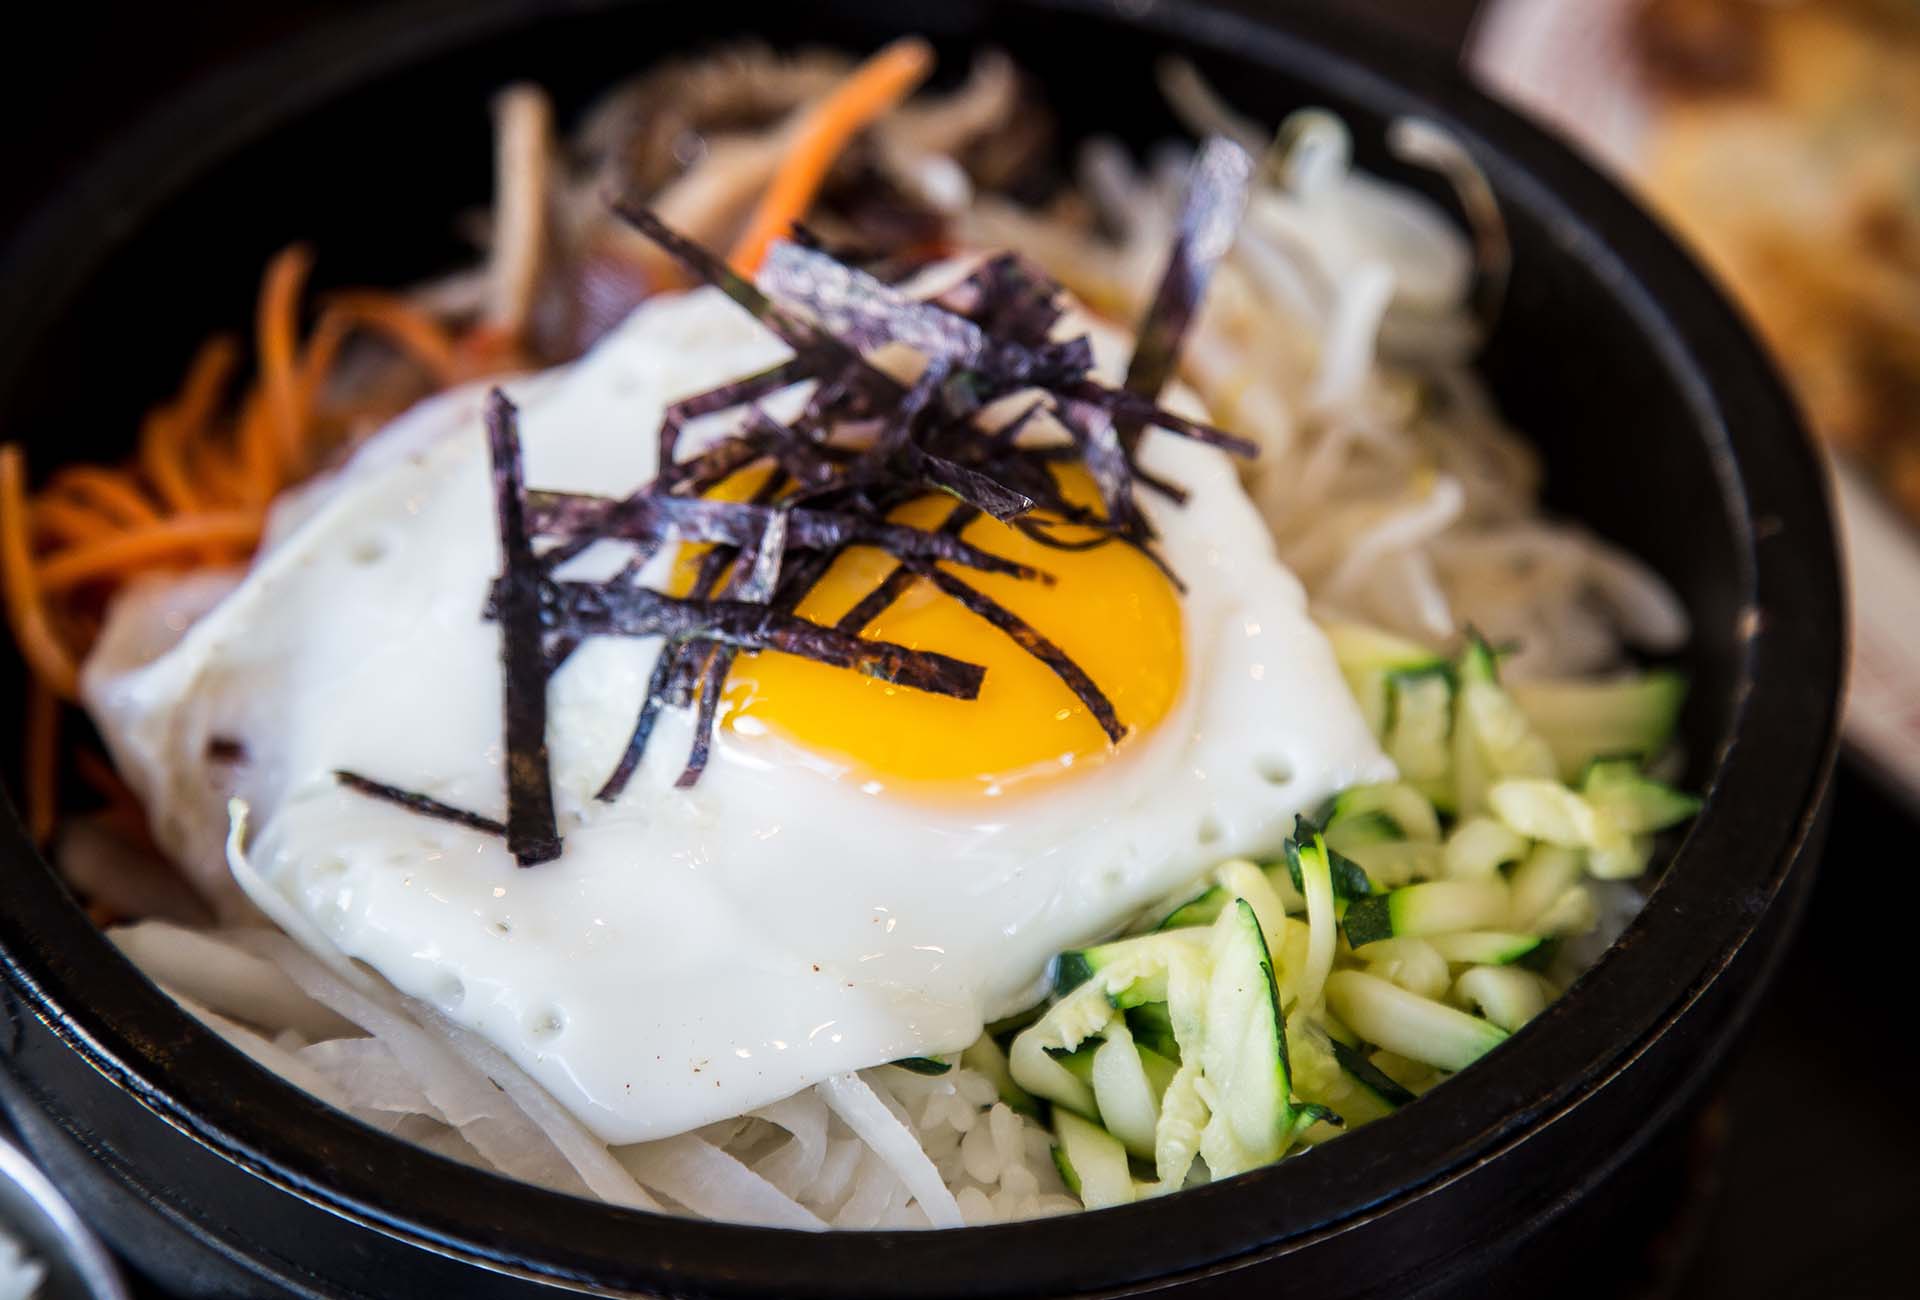 A traditional bibimbap served in a hot stone bowl